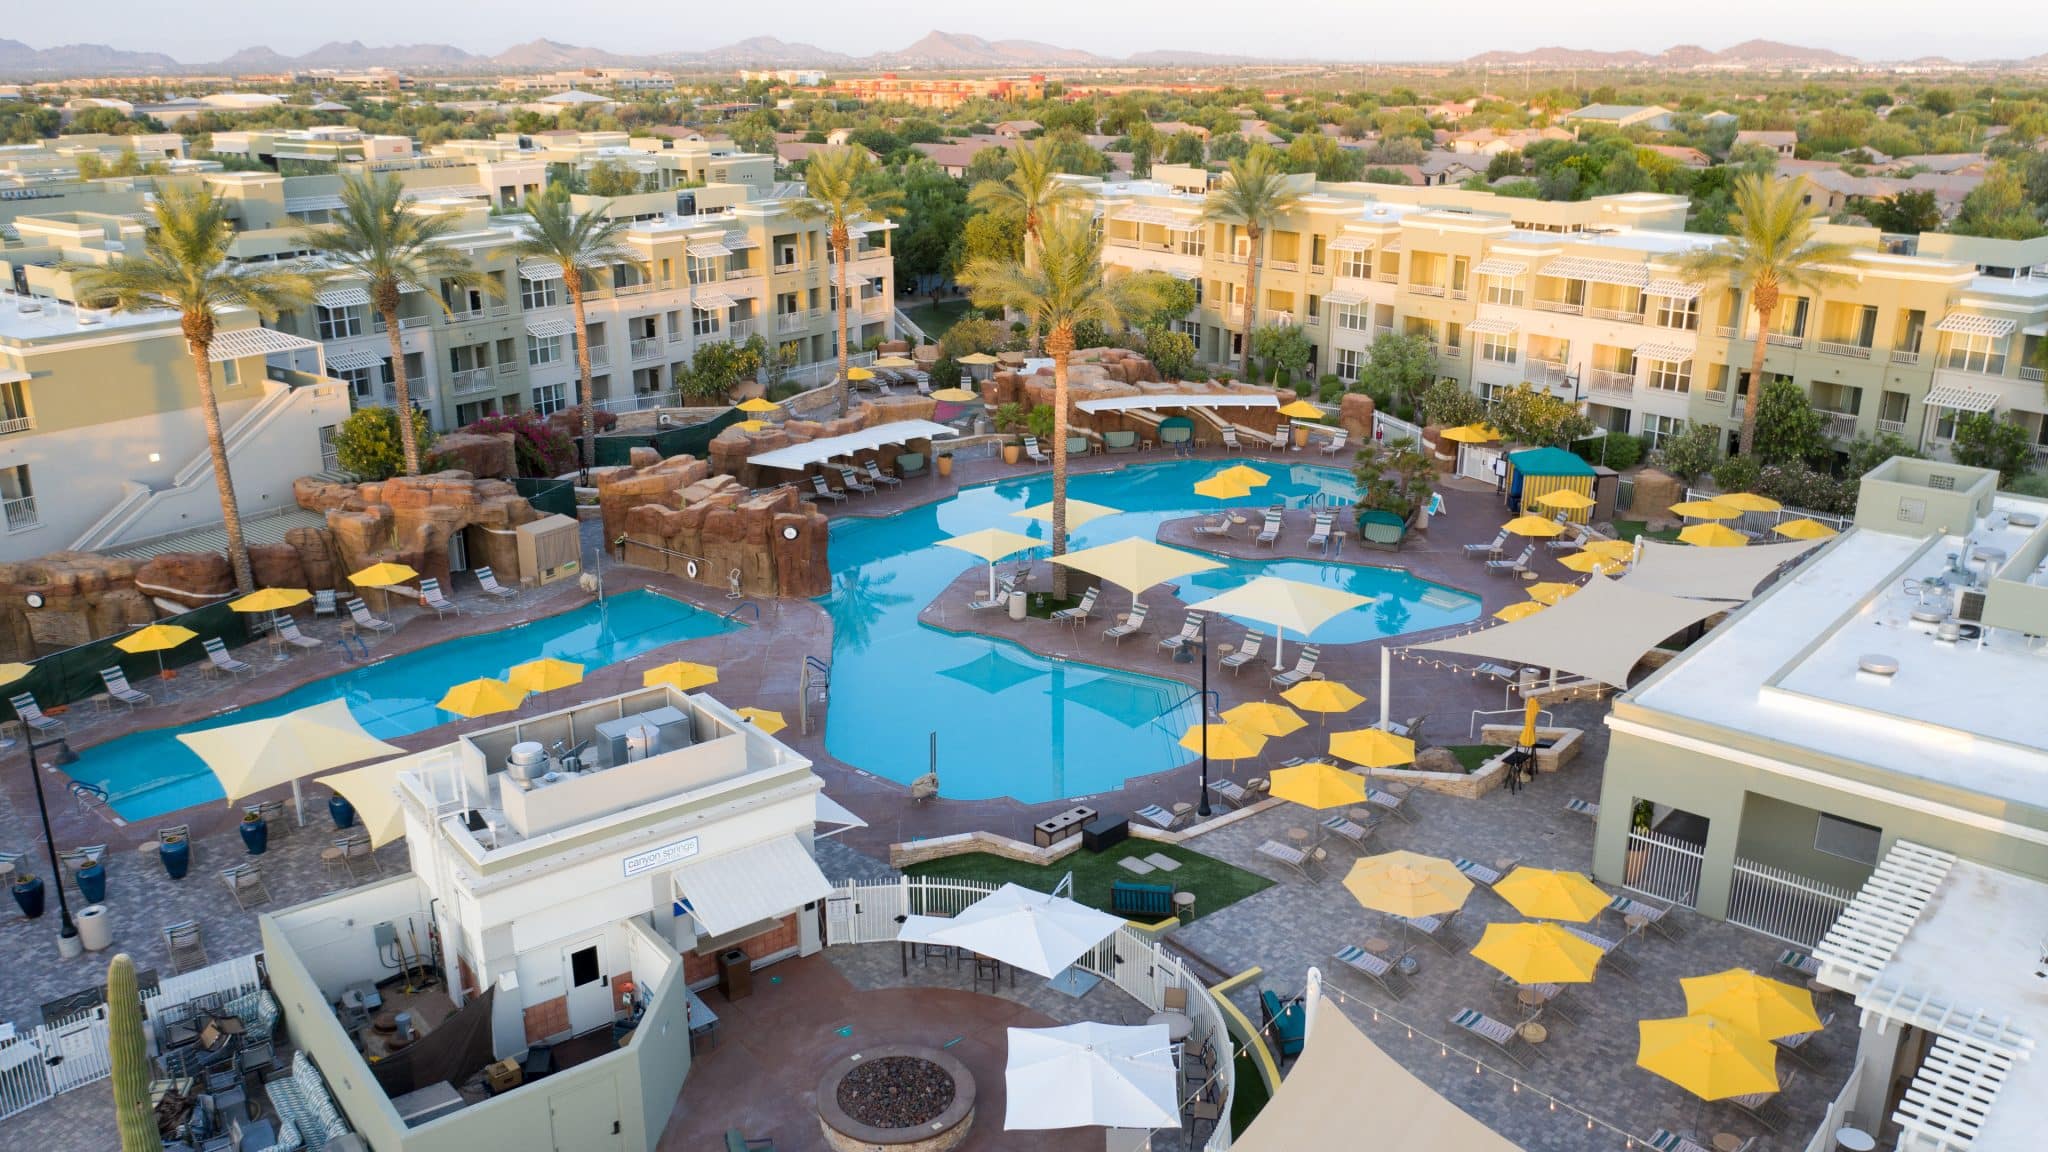 local phoenix drone agency multifamily hospitality scaled